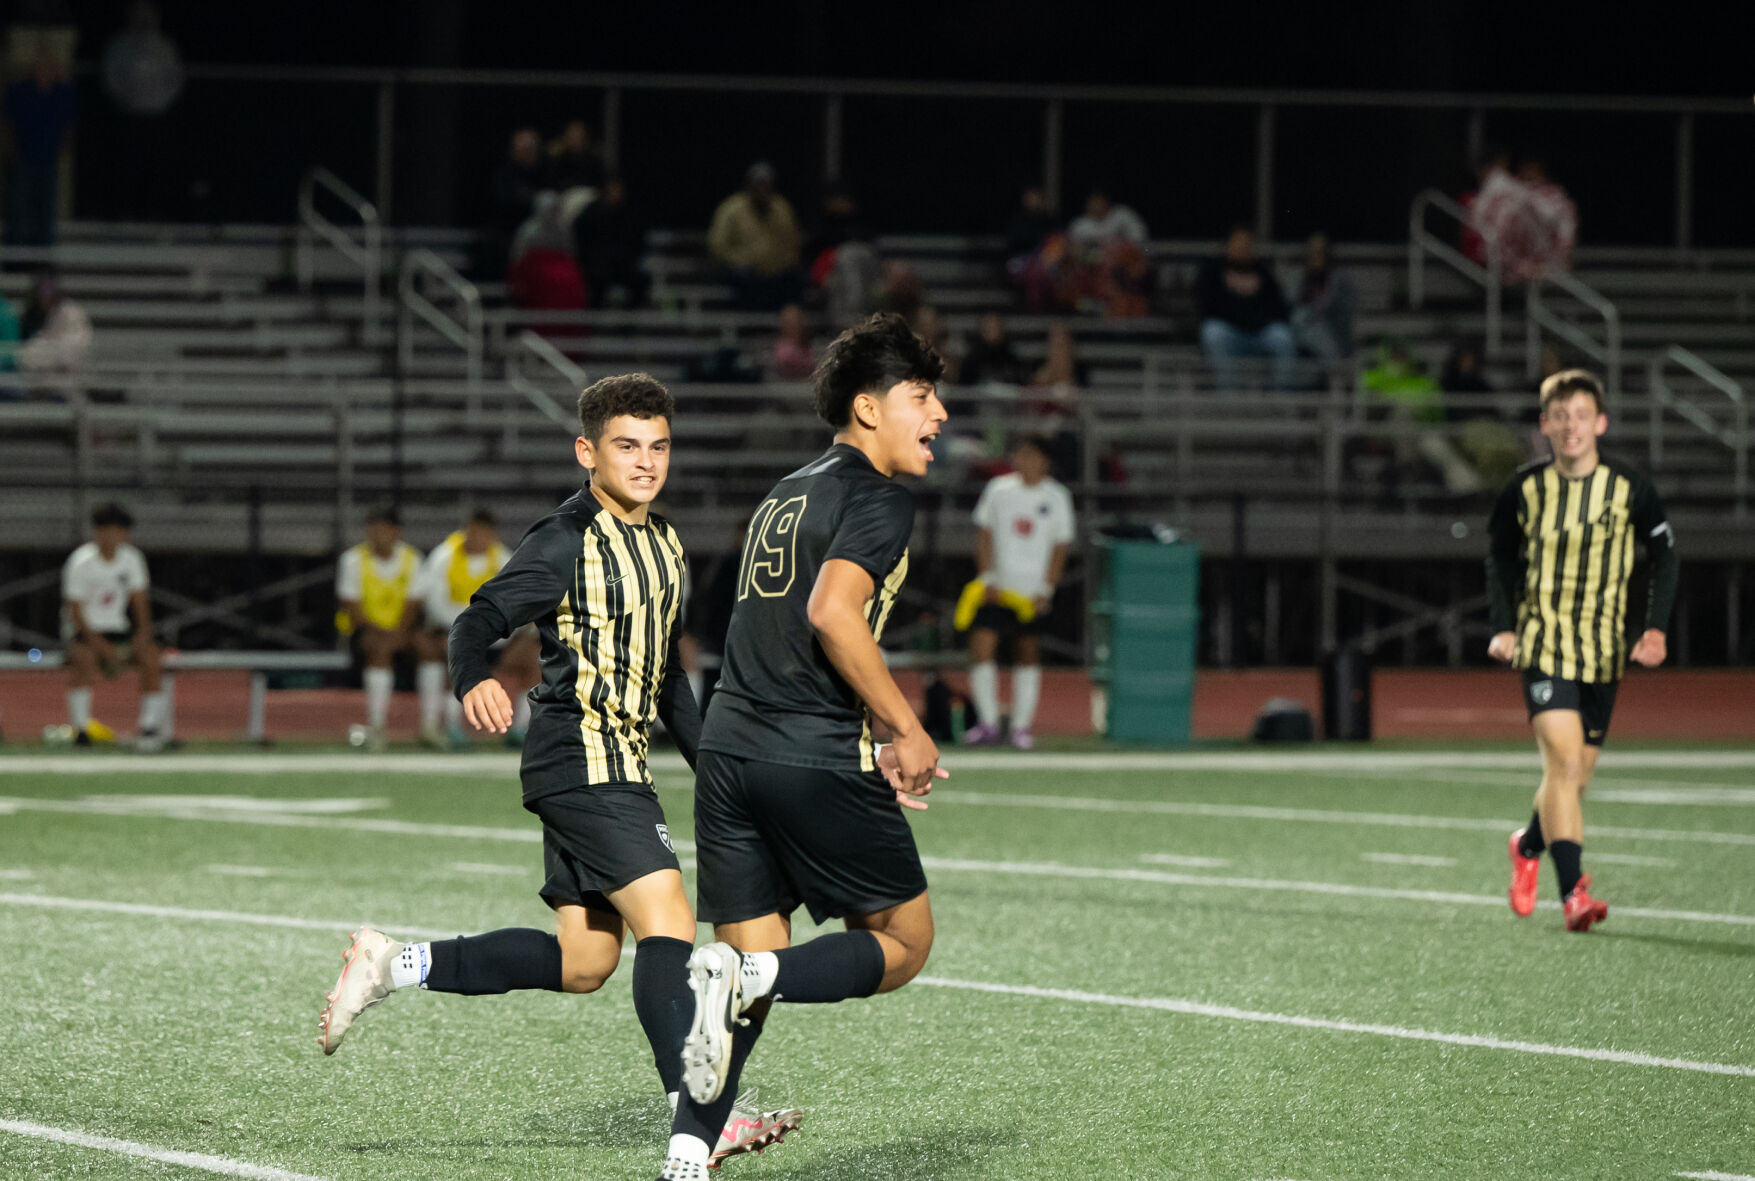 McAlester Dominates Poteau 3-1: Fernandez and Judkins Lead Buffs to Victory